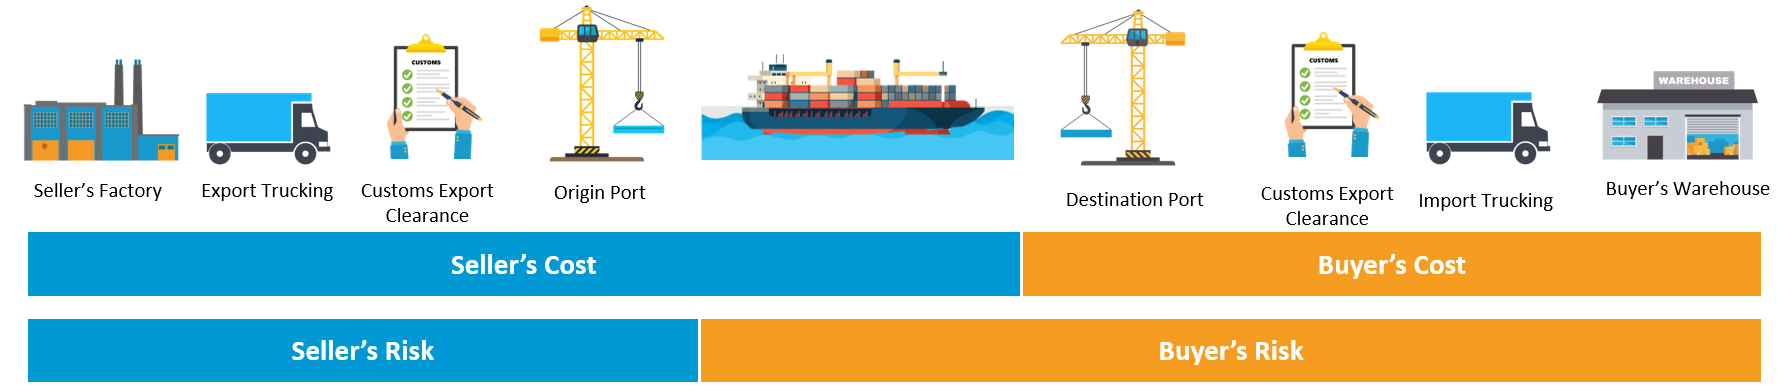 Cost insurance freight shipping process